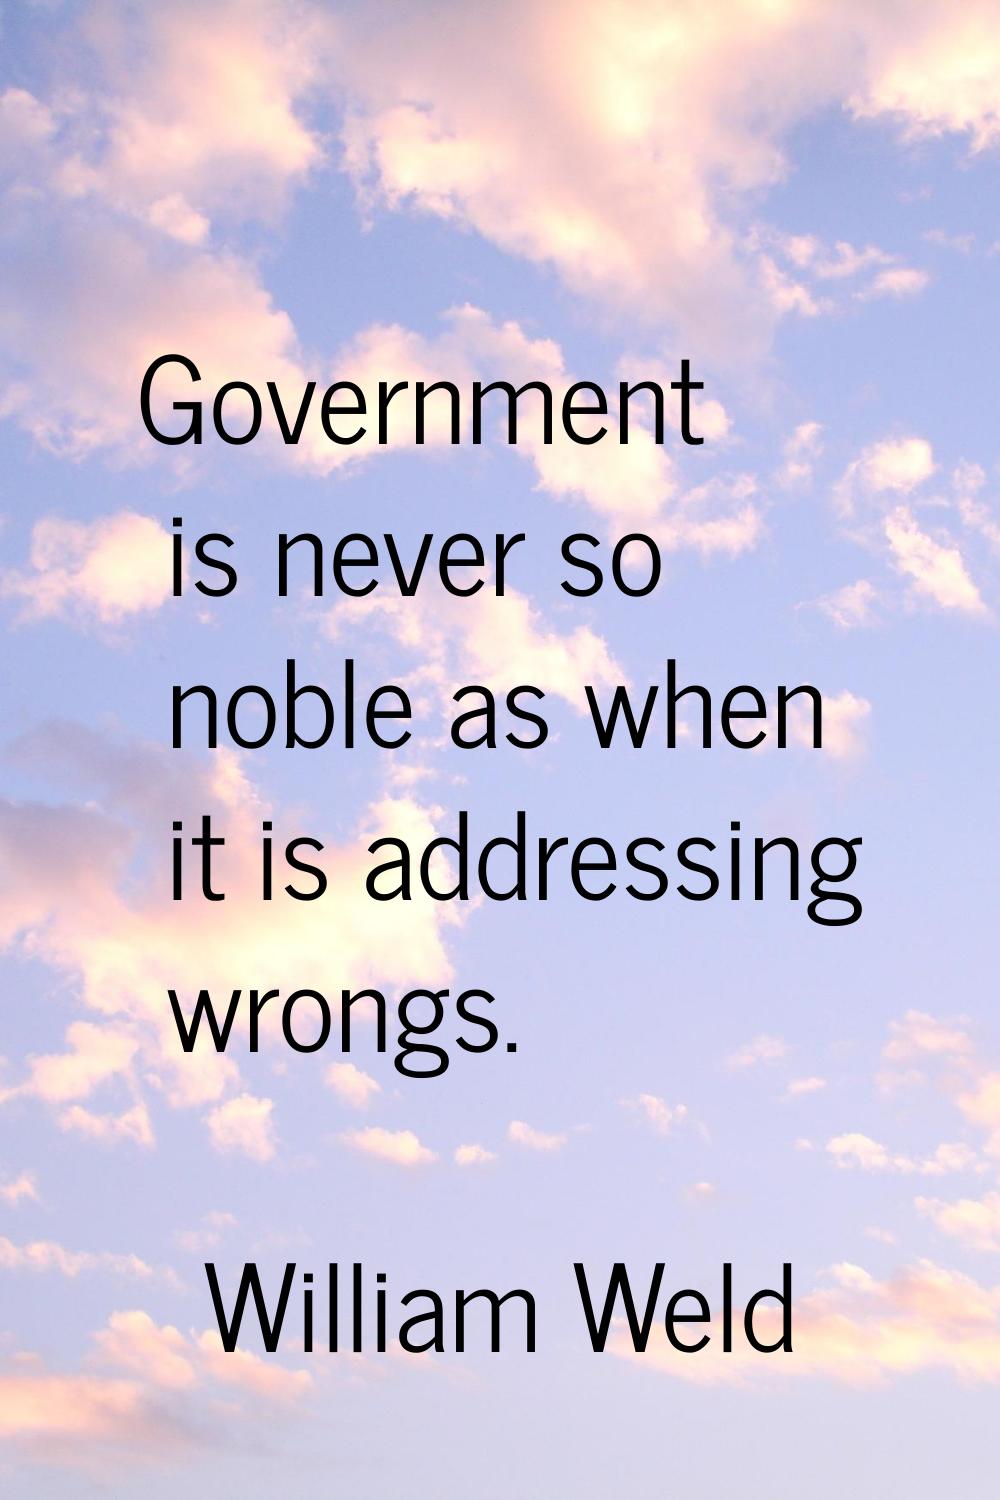 Government is never so noble as when it is addressing wrongs.